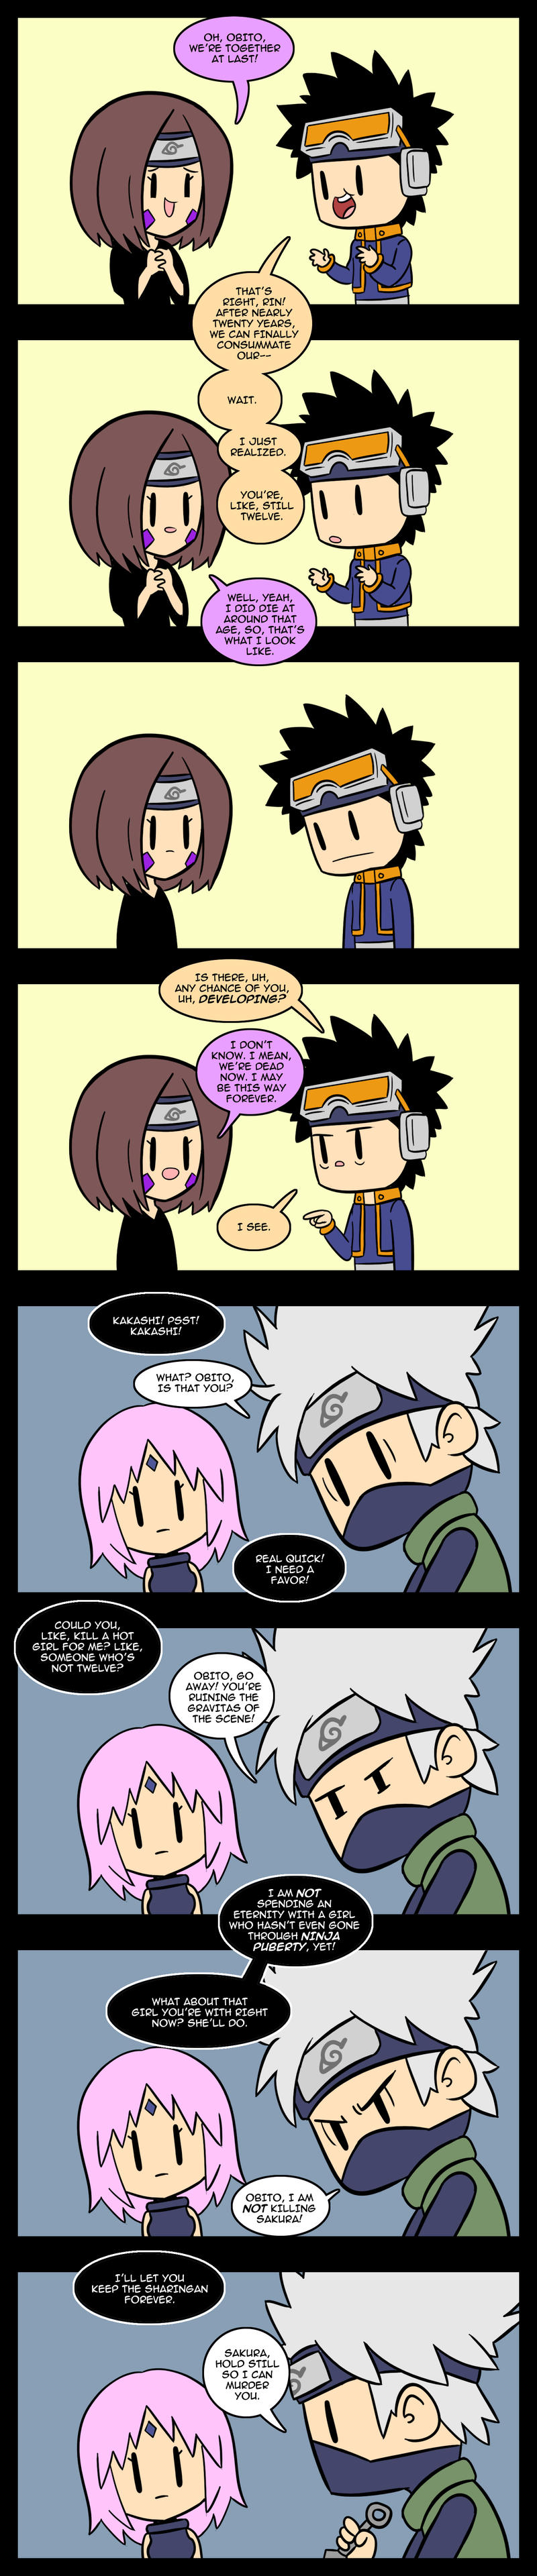 naruto__unmet_expectations_by_neodusk-d7